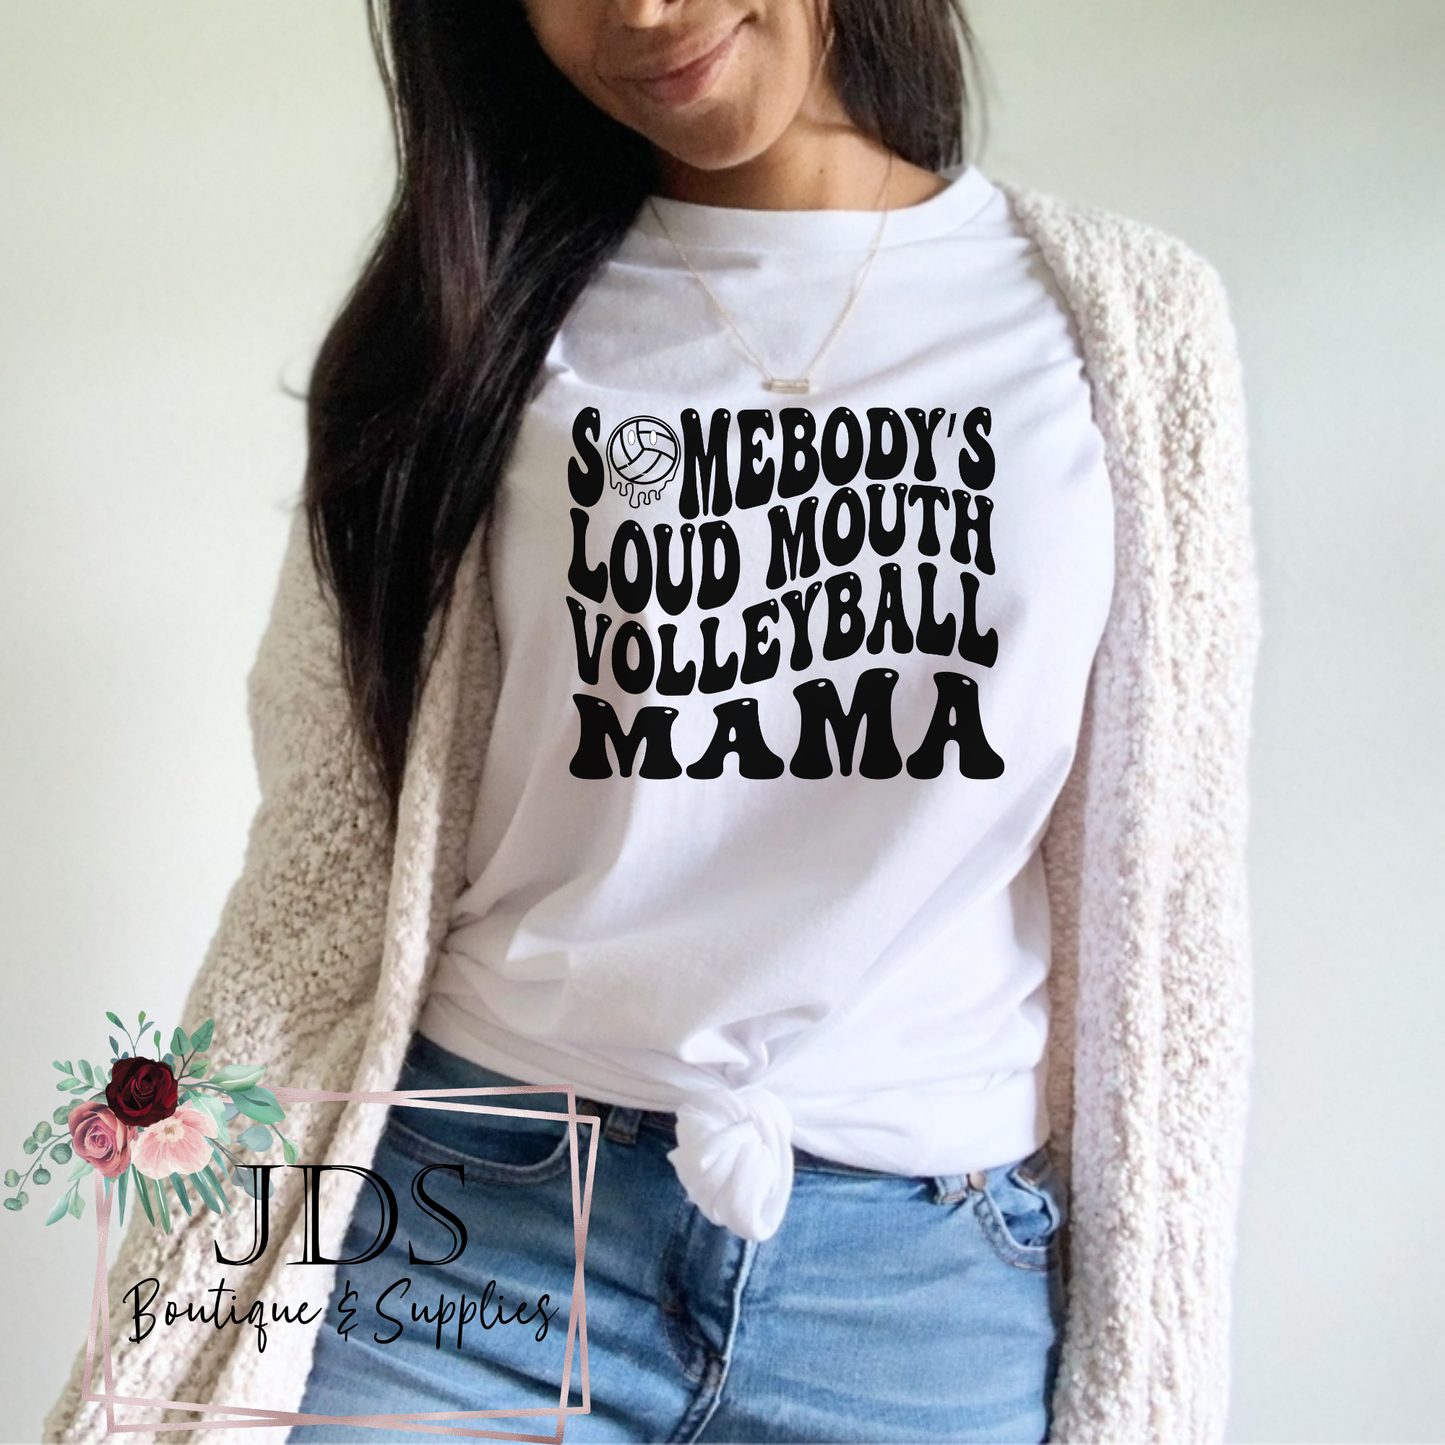 Somebody's Loud Mouth Volleyball Mama Shirt